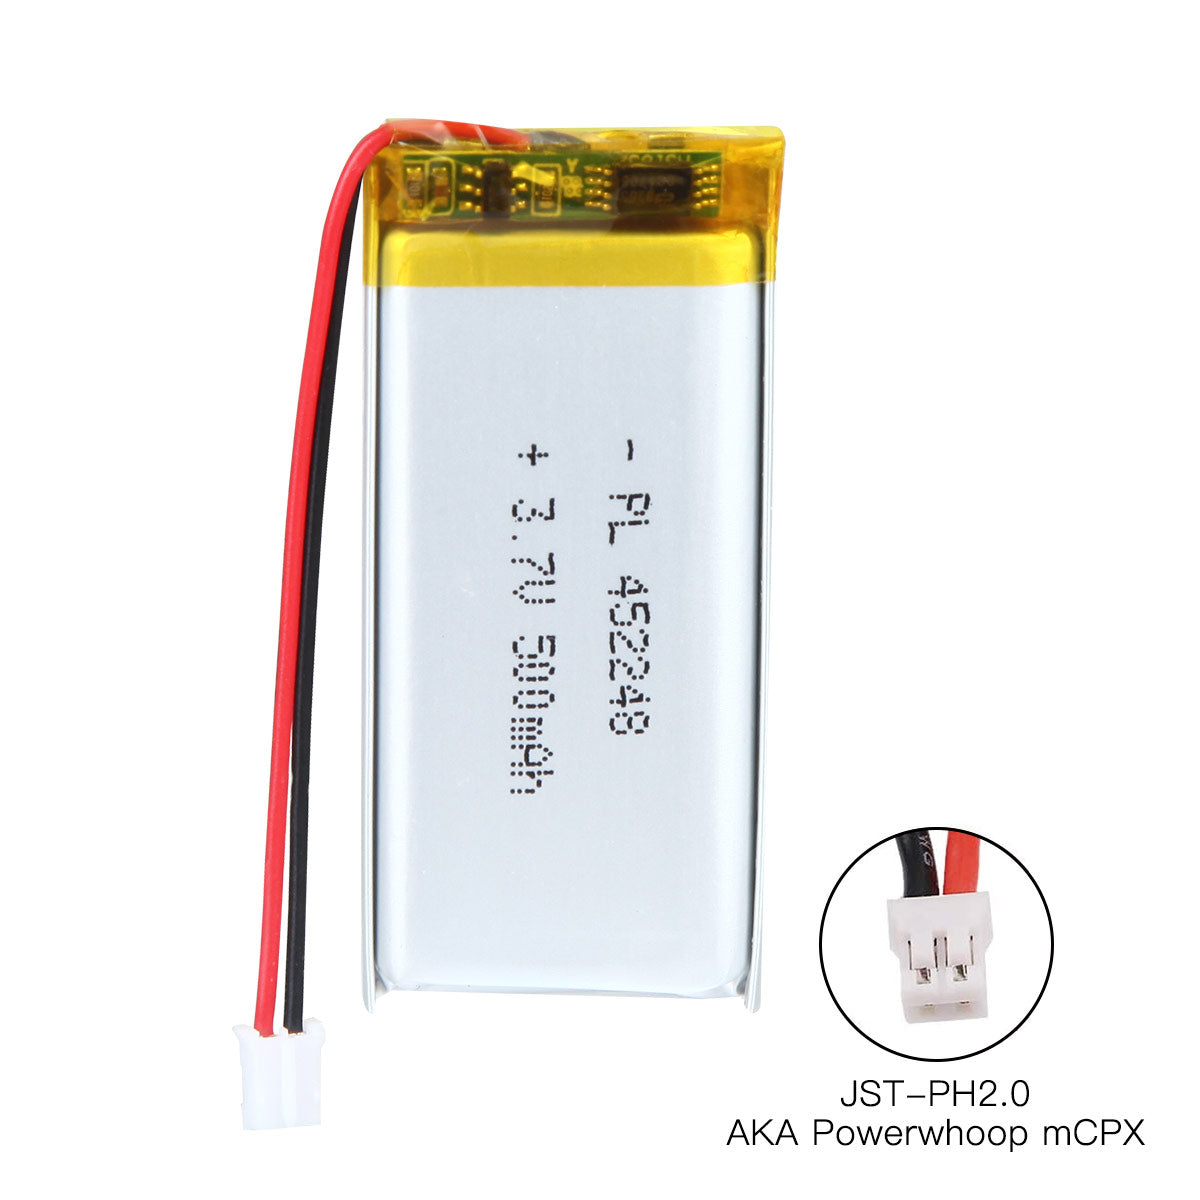 YDL 3.7V 500mAh 452248 Rechargeable Lithium Polymer Battery Length 50mm